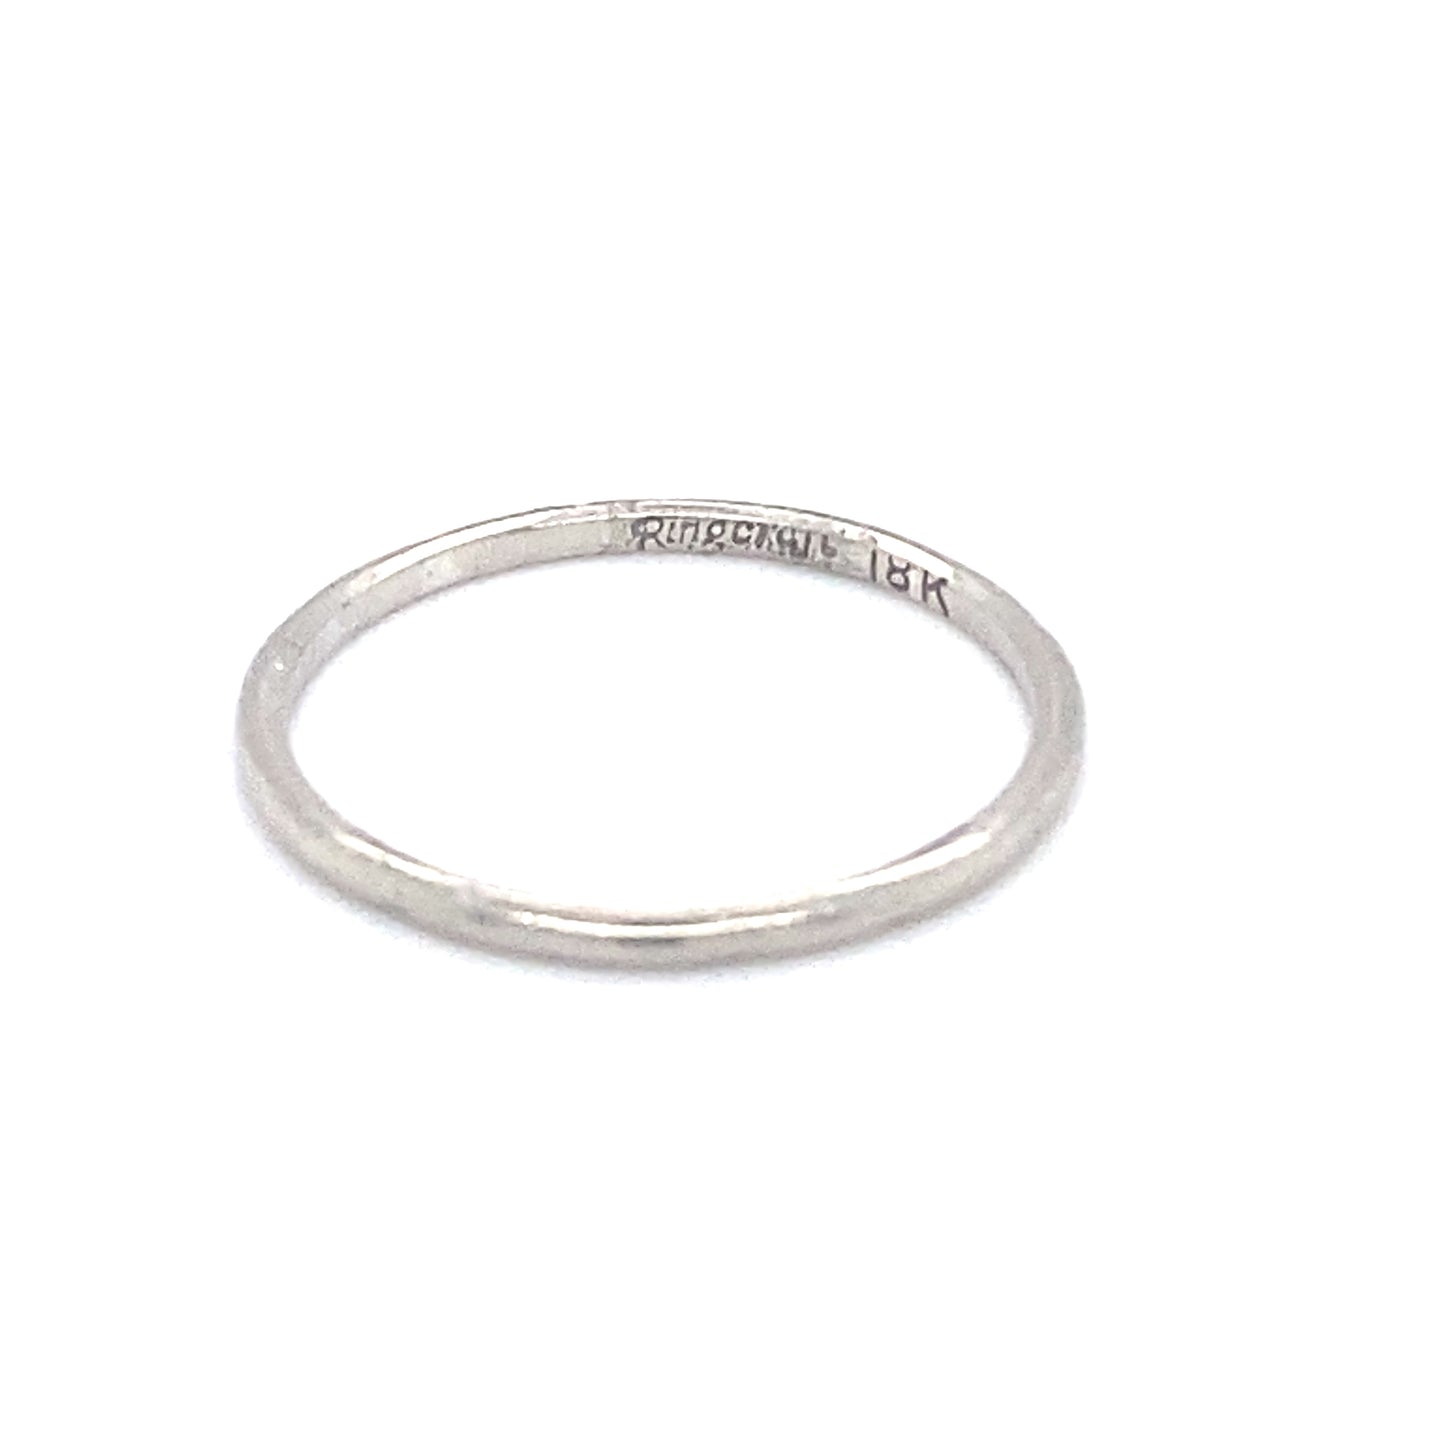 Circa 1920s Etched Wedding Band in 18K White Gold